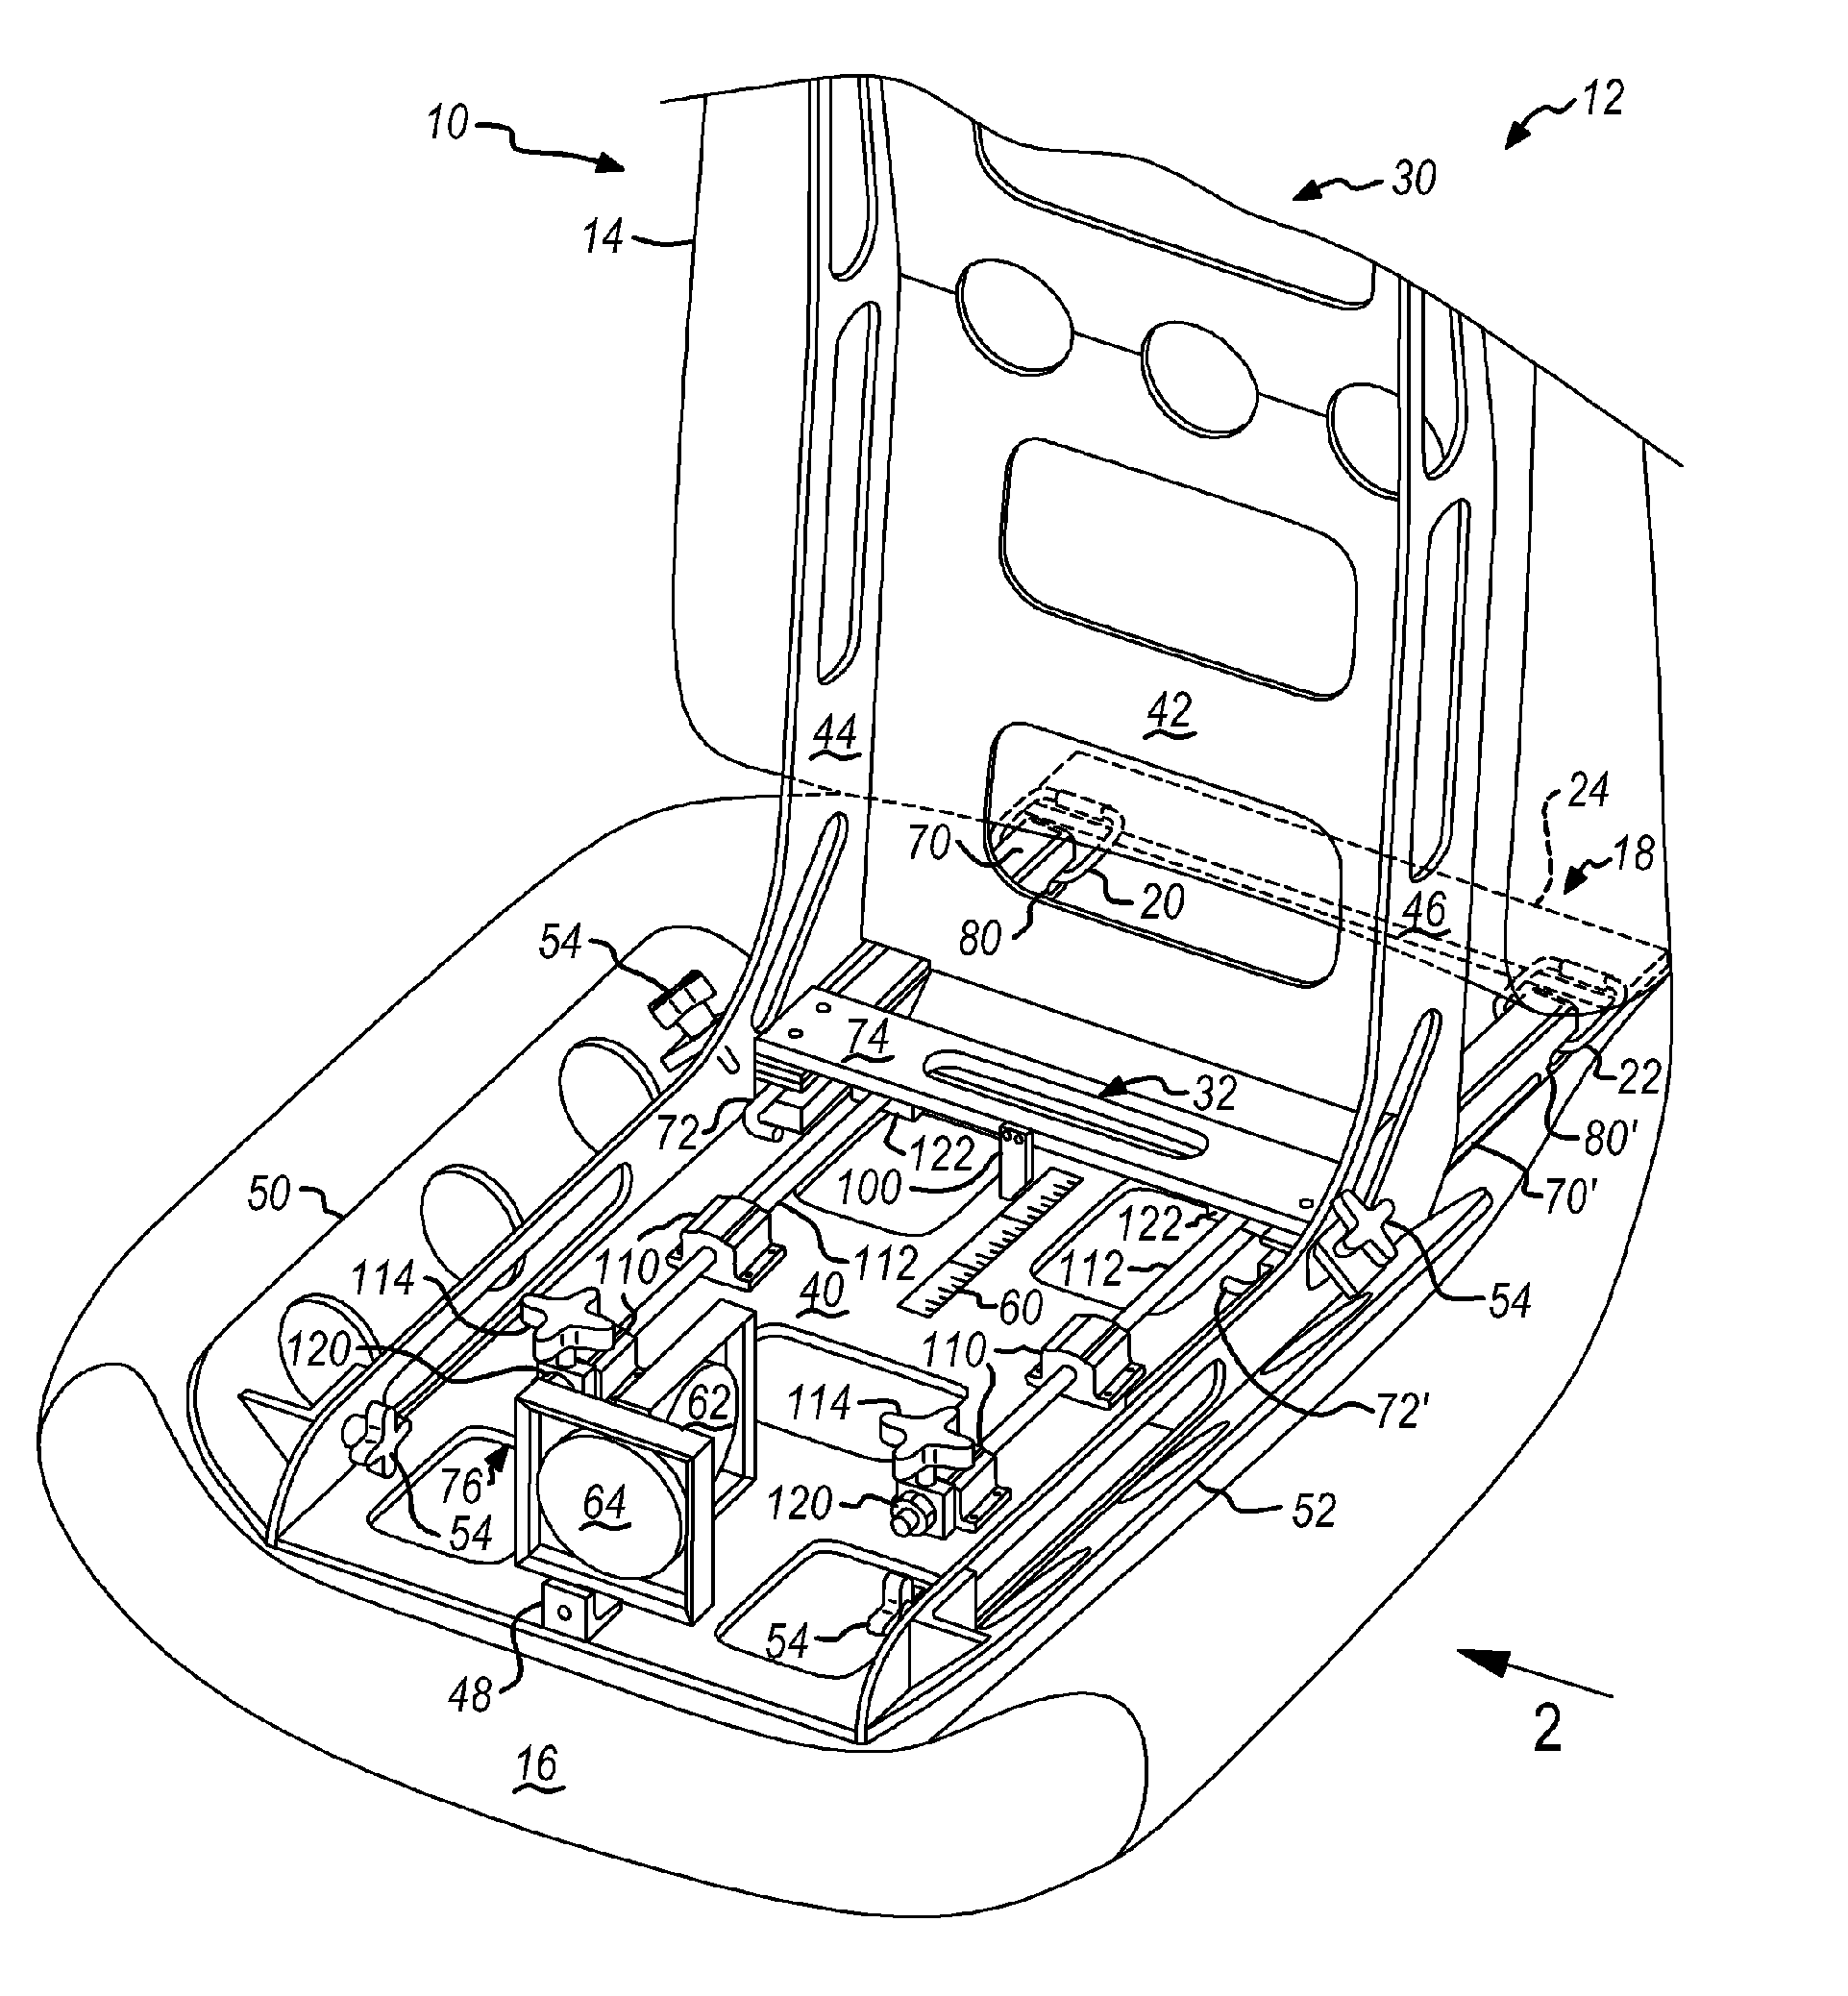 An apparatus and a method for assessing an anchorage position